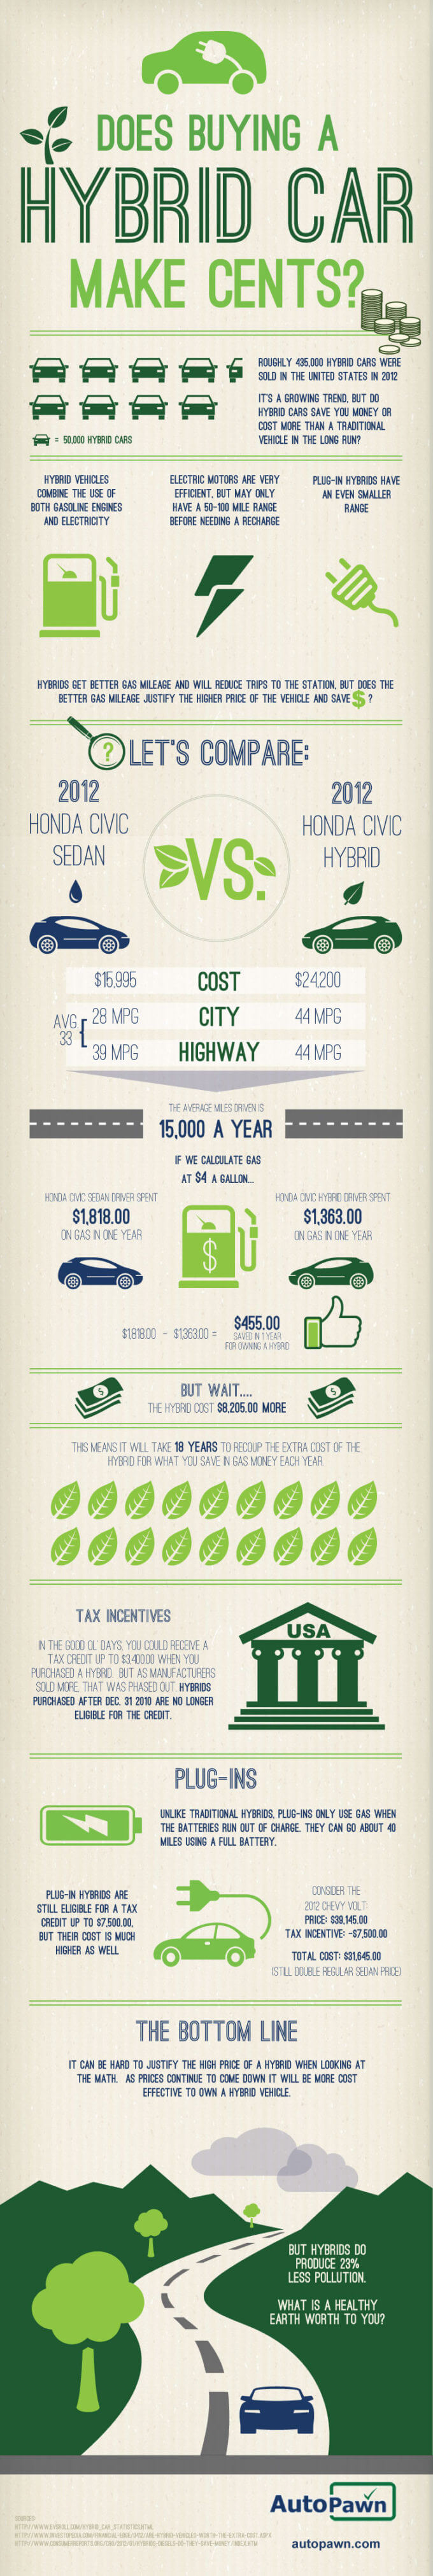 The Cost of a Hybrid Car vs a Traditional Car [Infographic] Greener Ideal